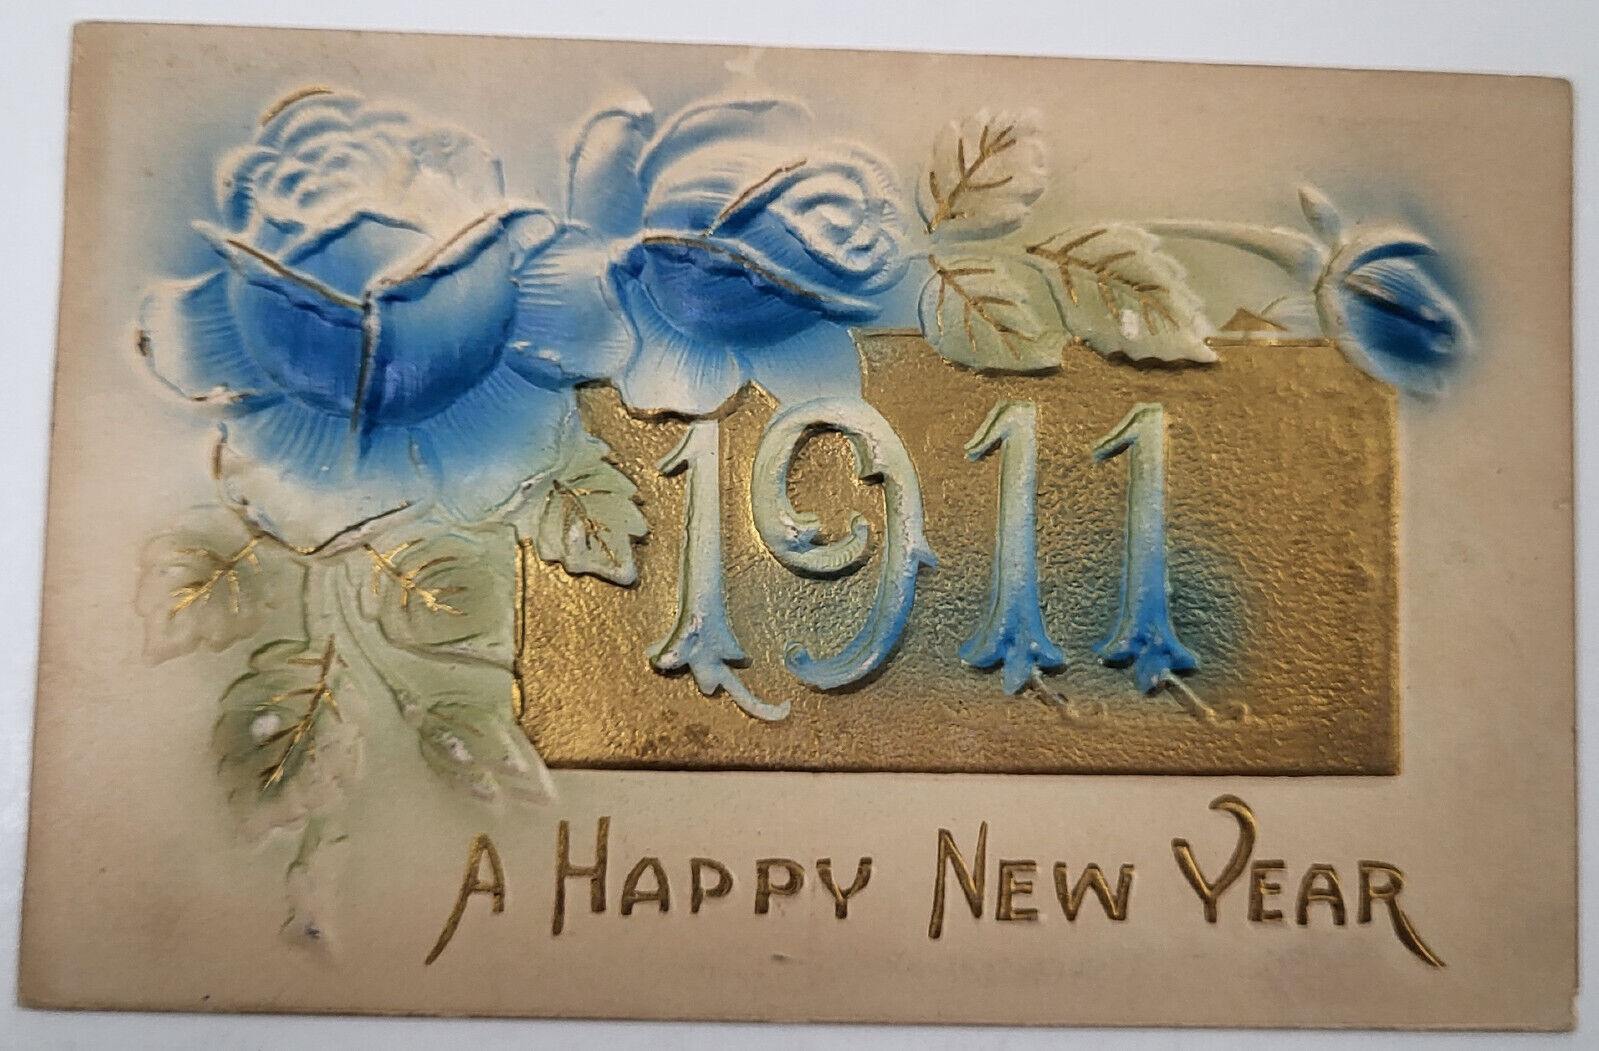 1909 YEAR DATE HAPPY NEW YEAR\'S POSTCARD BAS RELIEF BLUE ROSES W/ GOLD ACCENTS